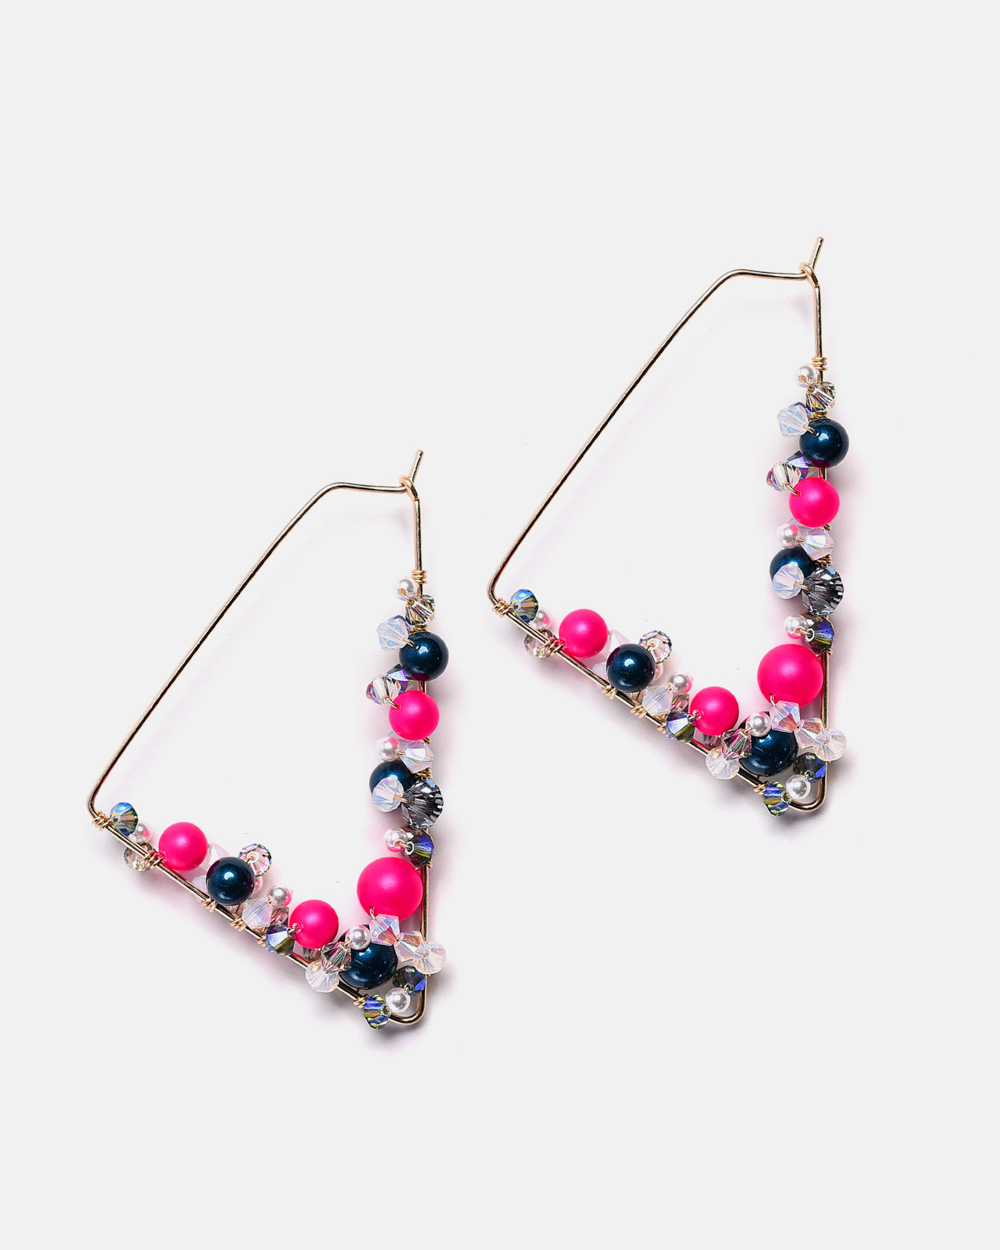 14k gold filled earrings with colorful pearls and crystals